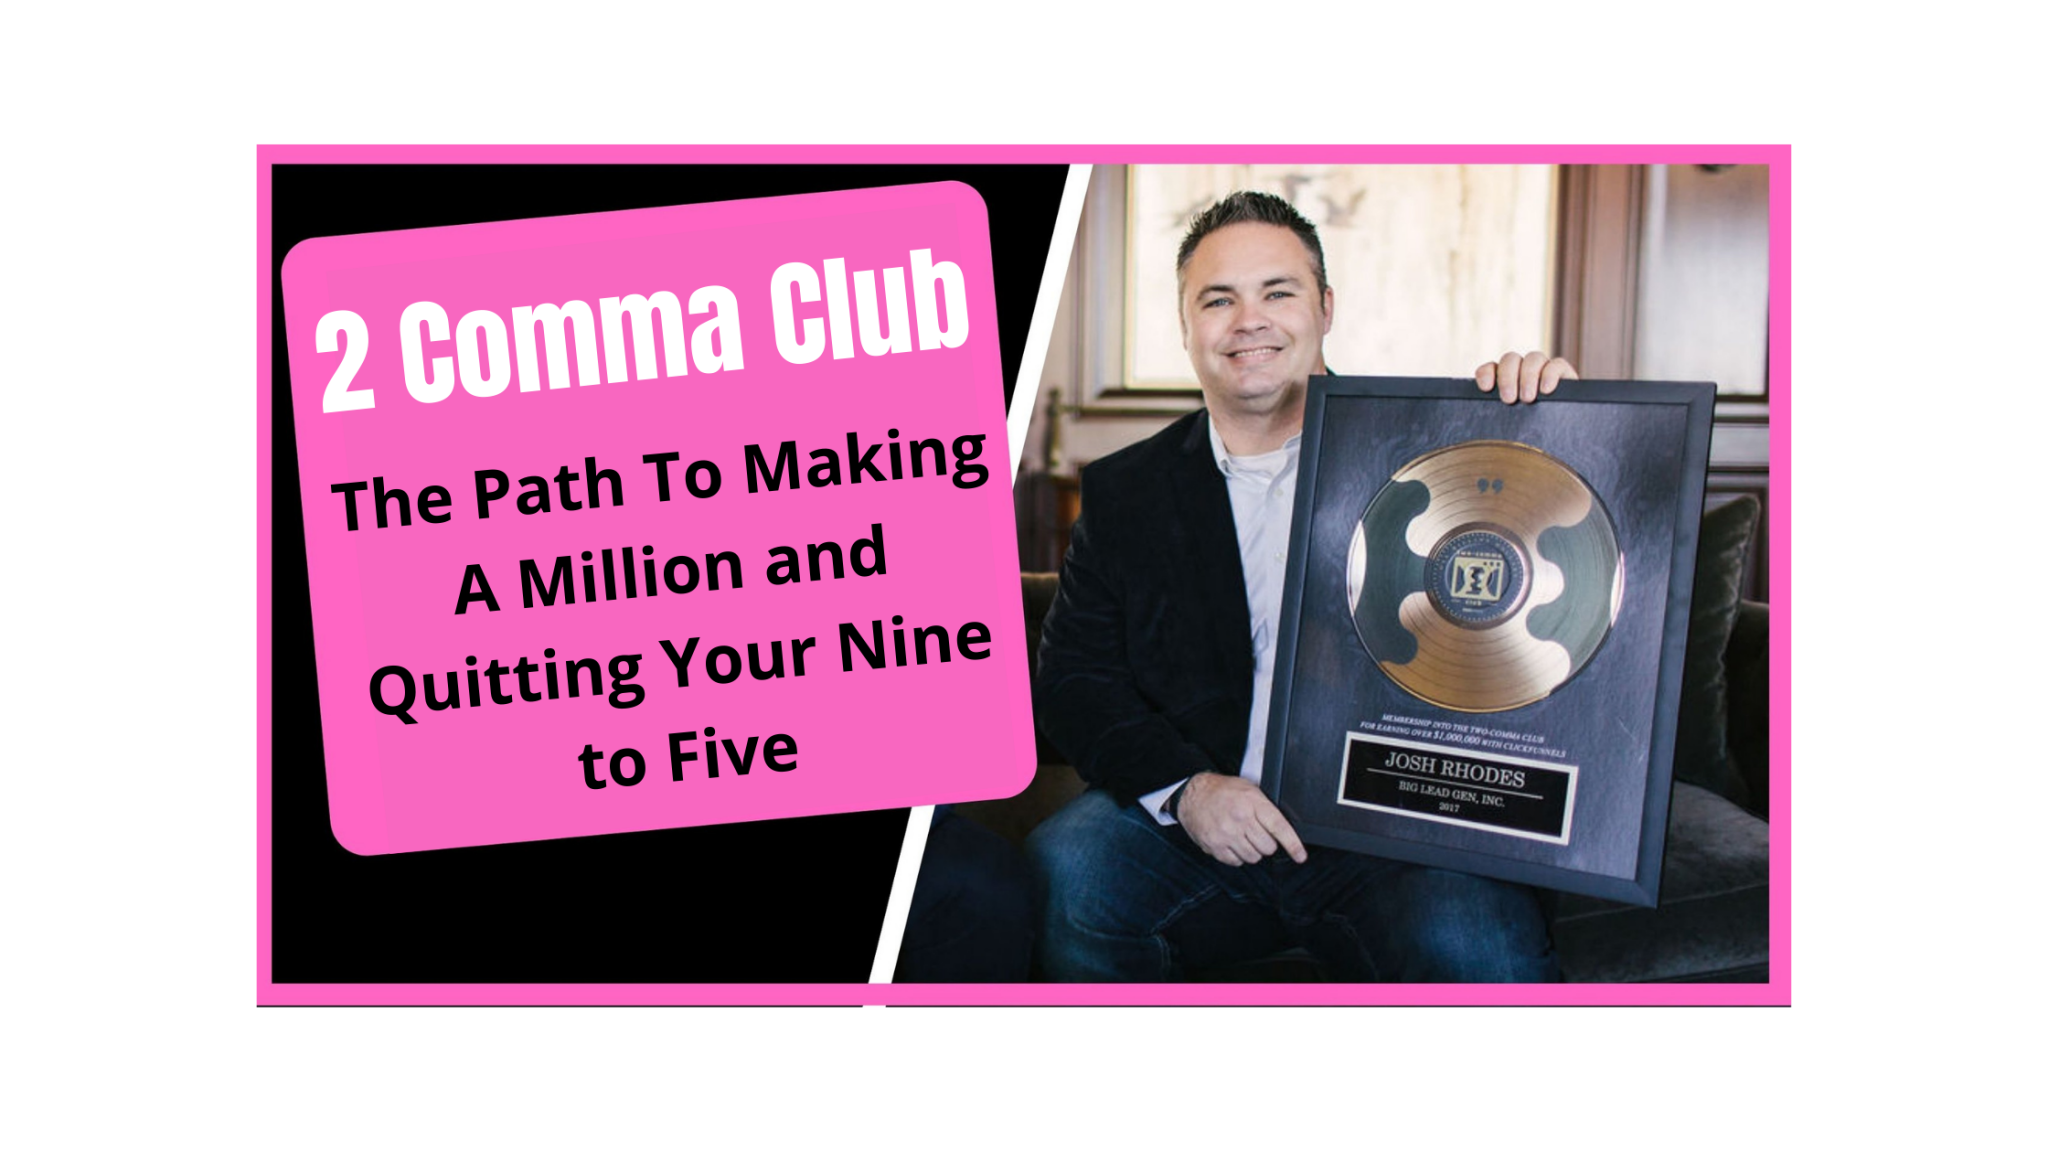 2 Comma Club: The Path To Making A Million & Quitting Your Nine to Five